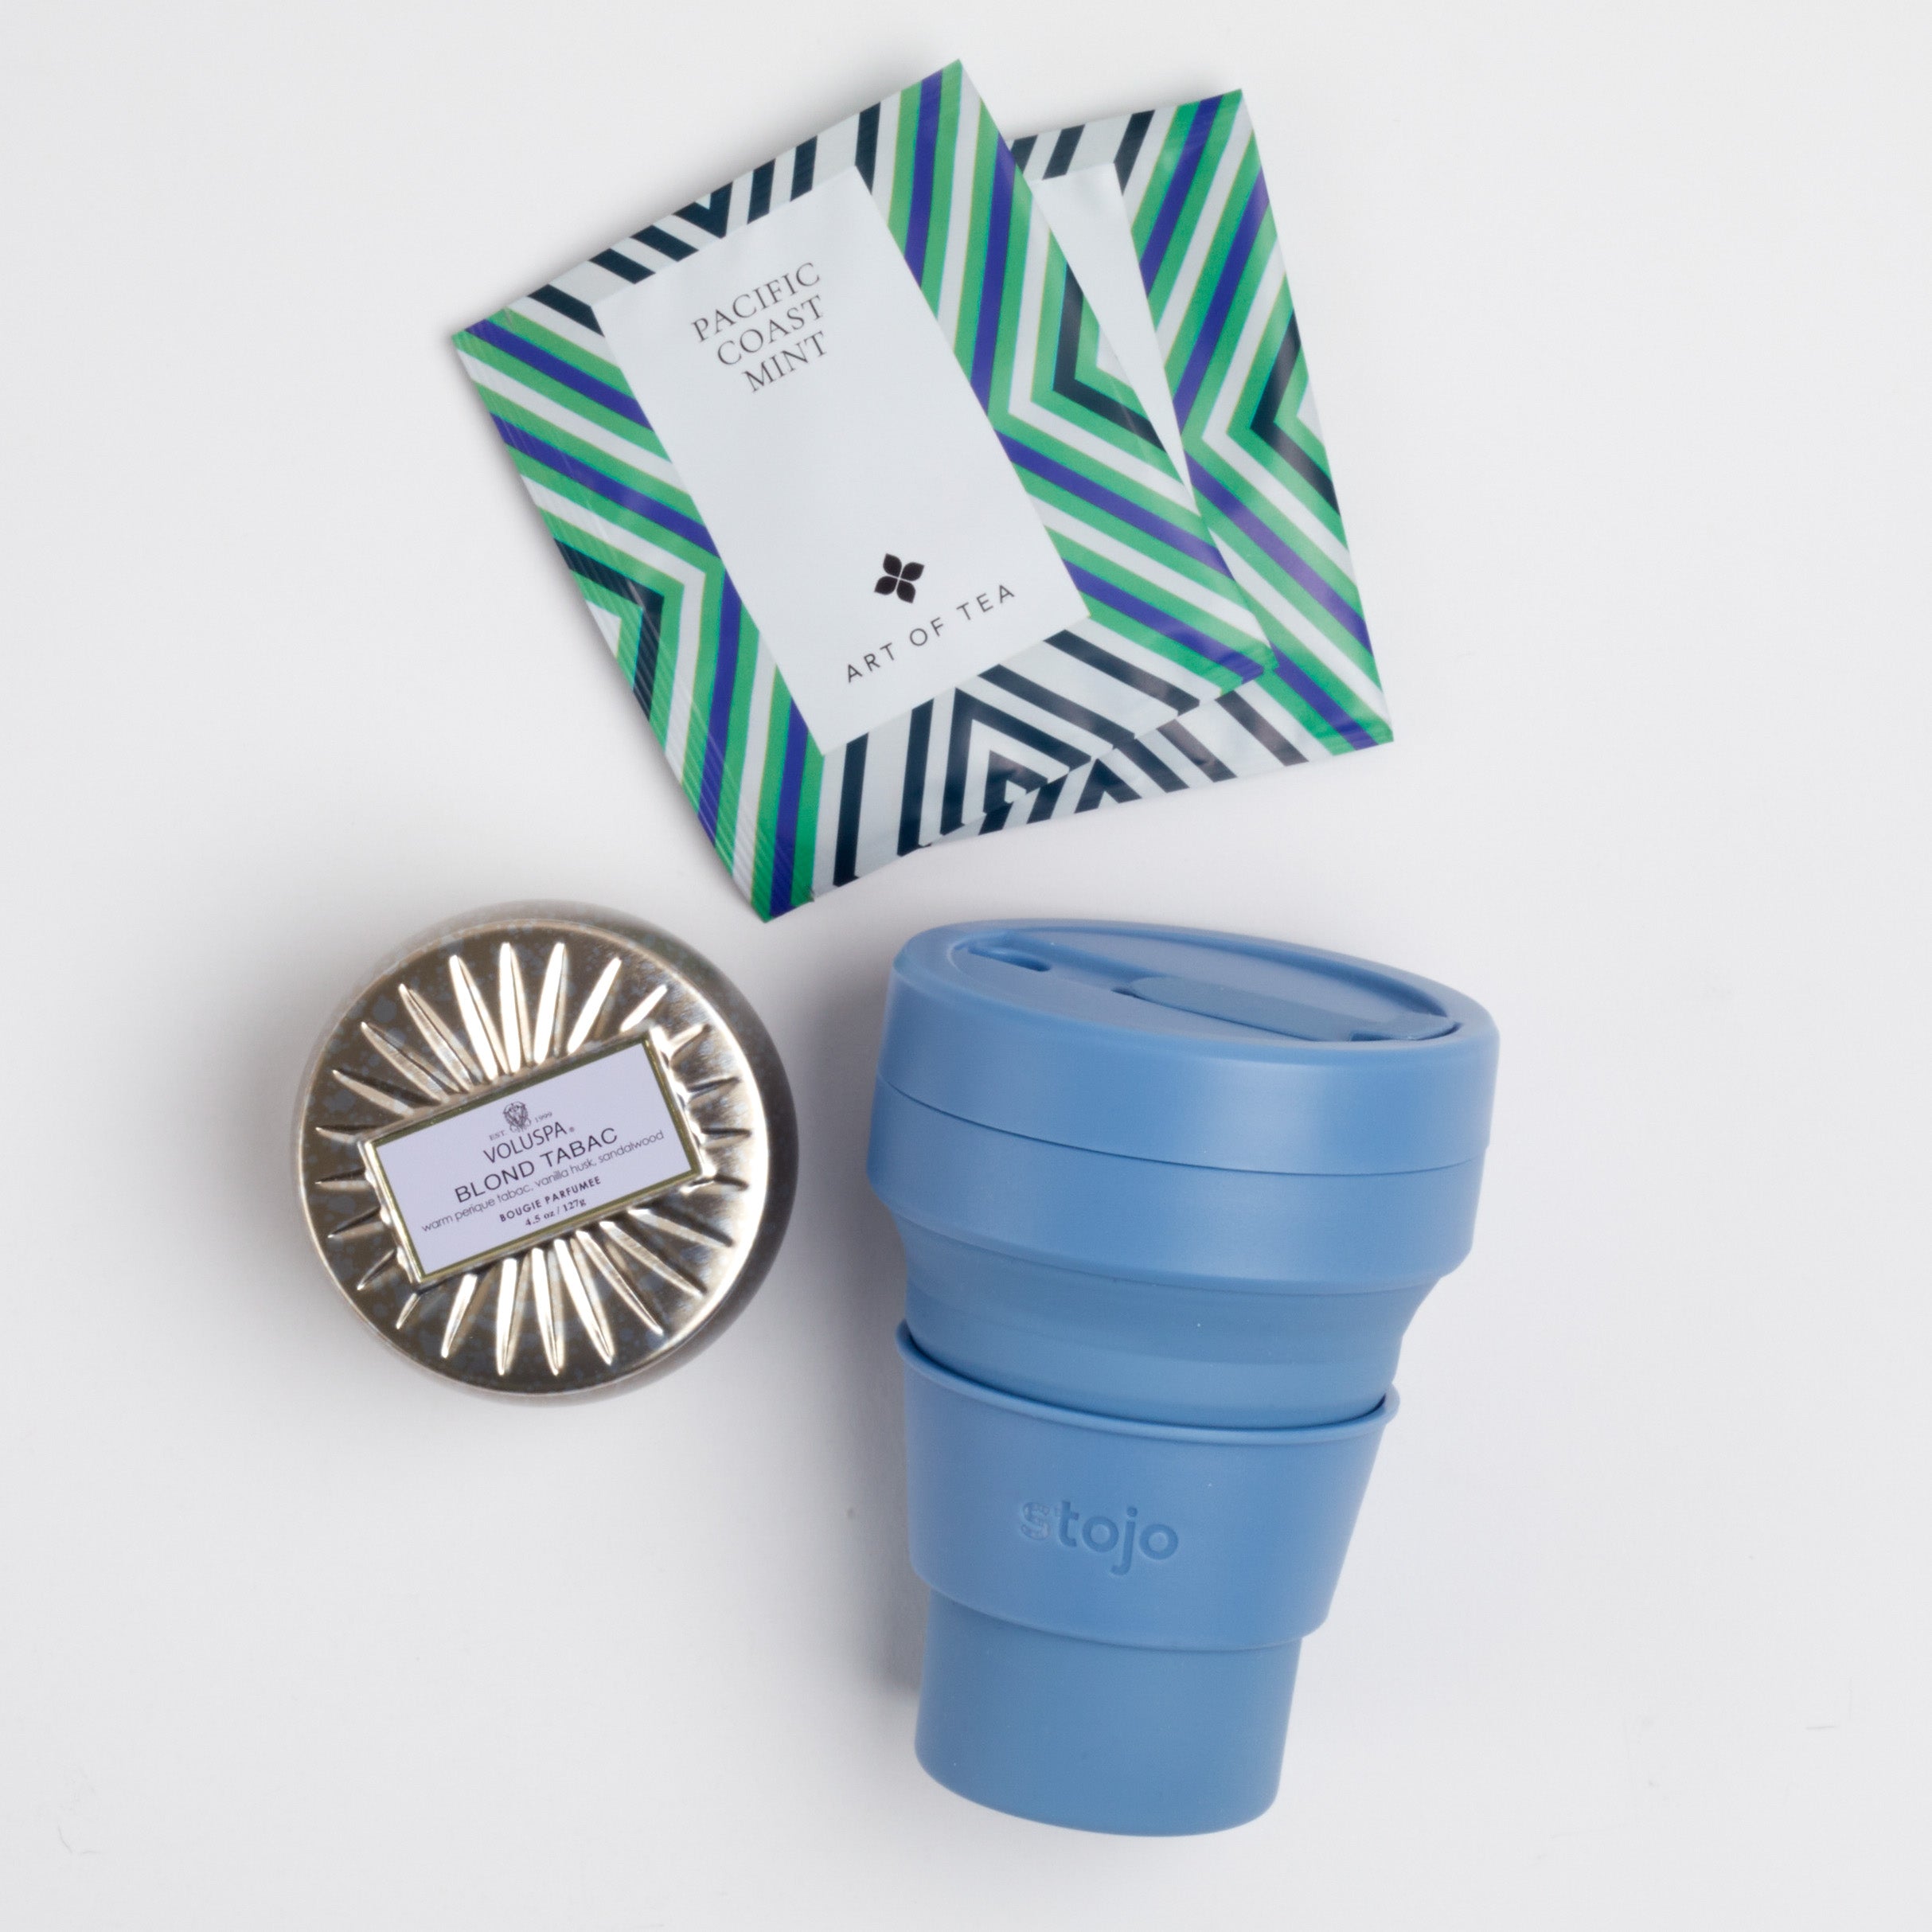 Blue collapsible cup, two art of tea sachets and silver tin candle on white background.